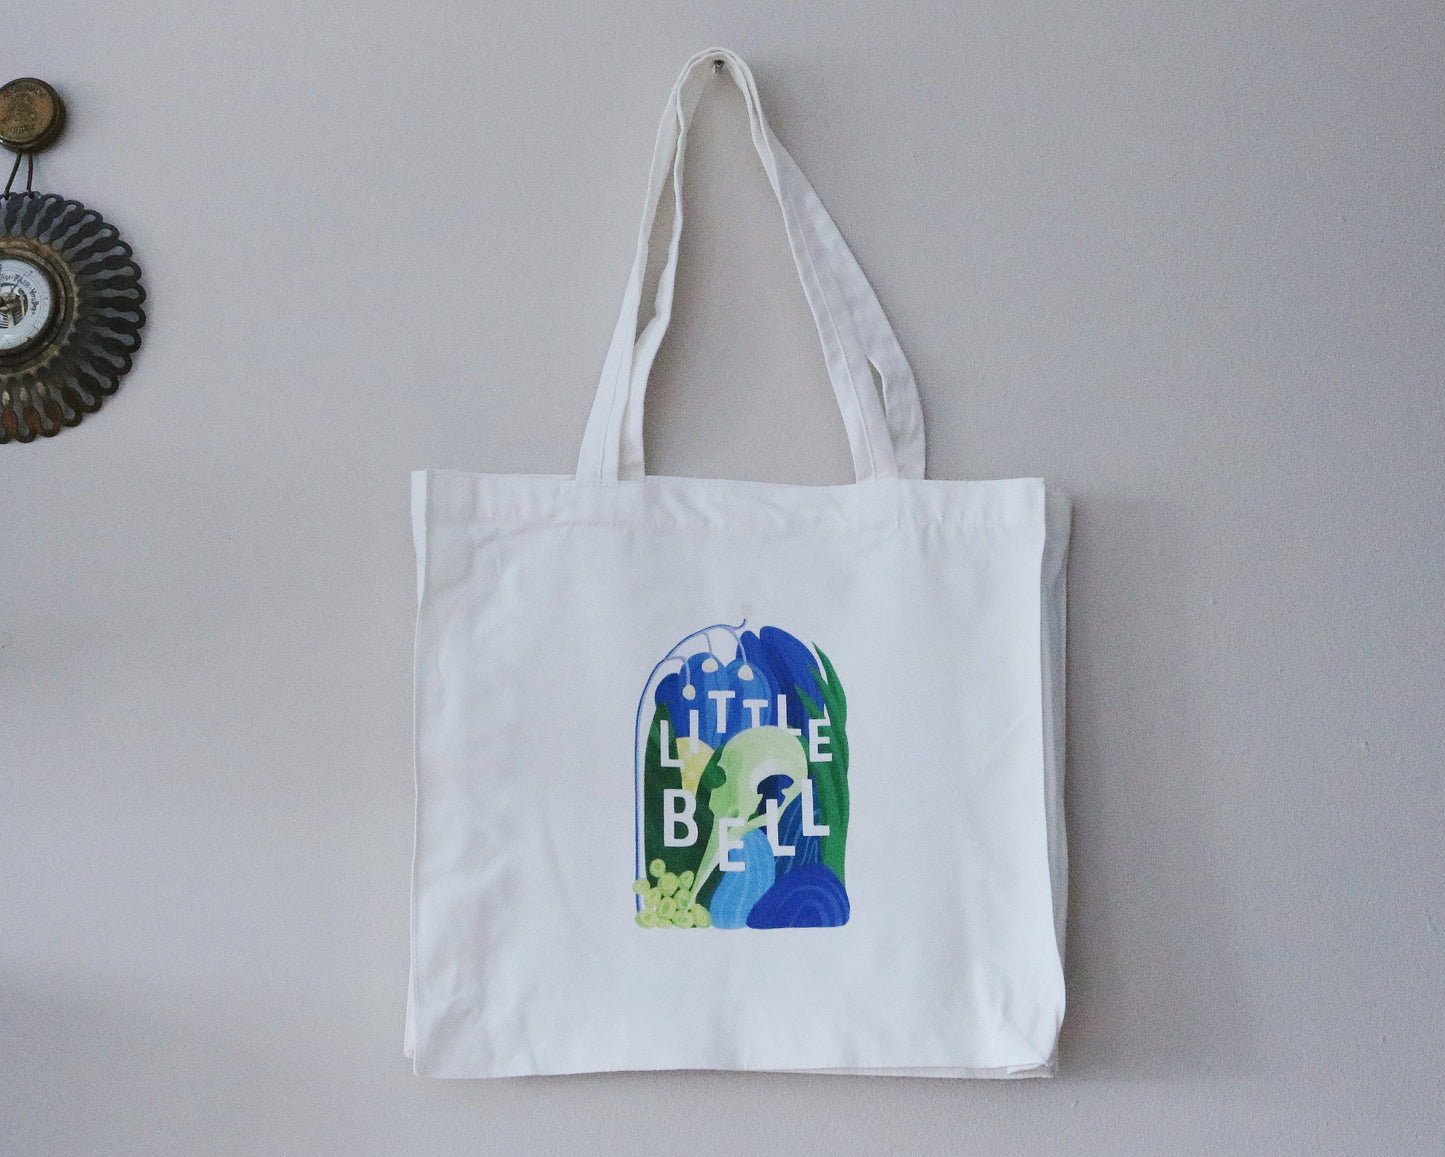 Little Bell Tote Bag | Cotton Canvas Tote | Nature and Oddities Print | Market Bag for Books, Groceries, Shopping | Curiosities Design